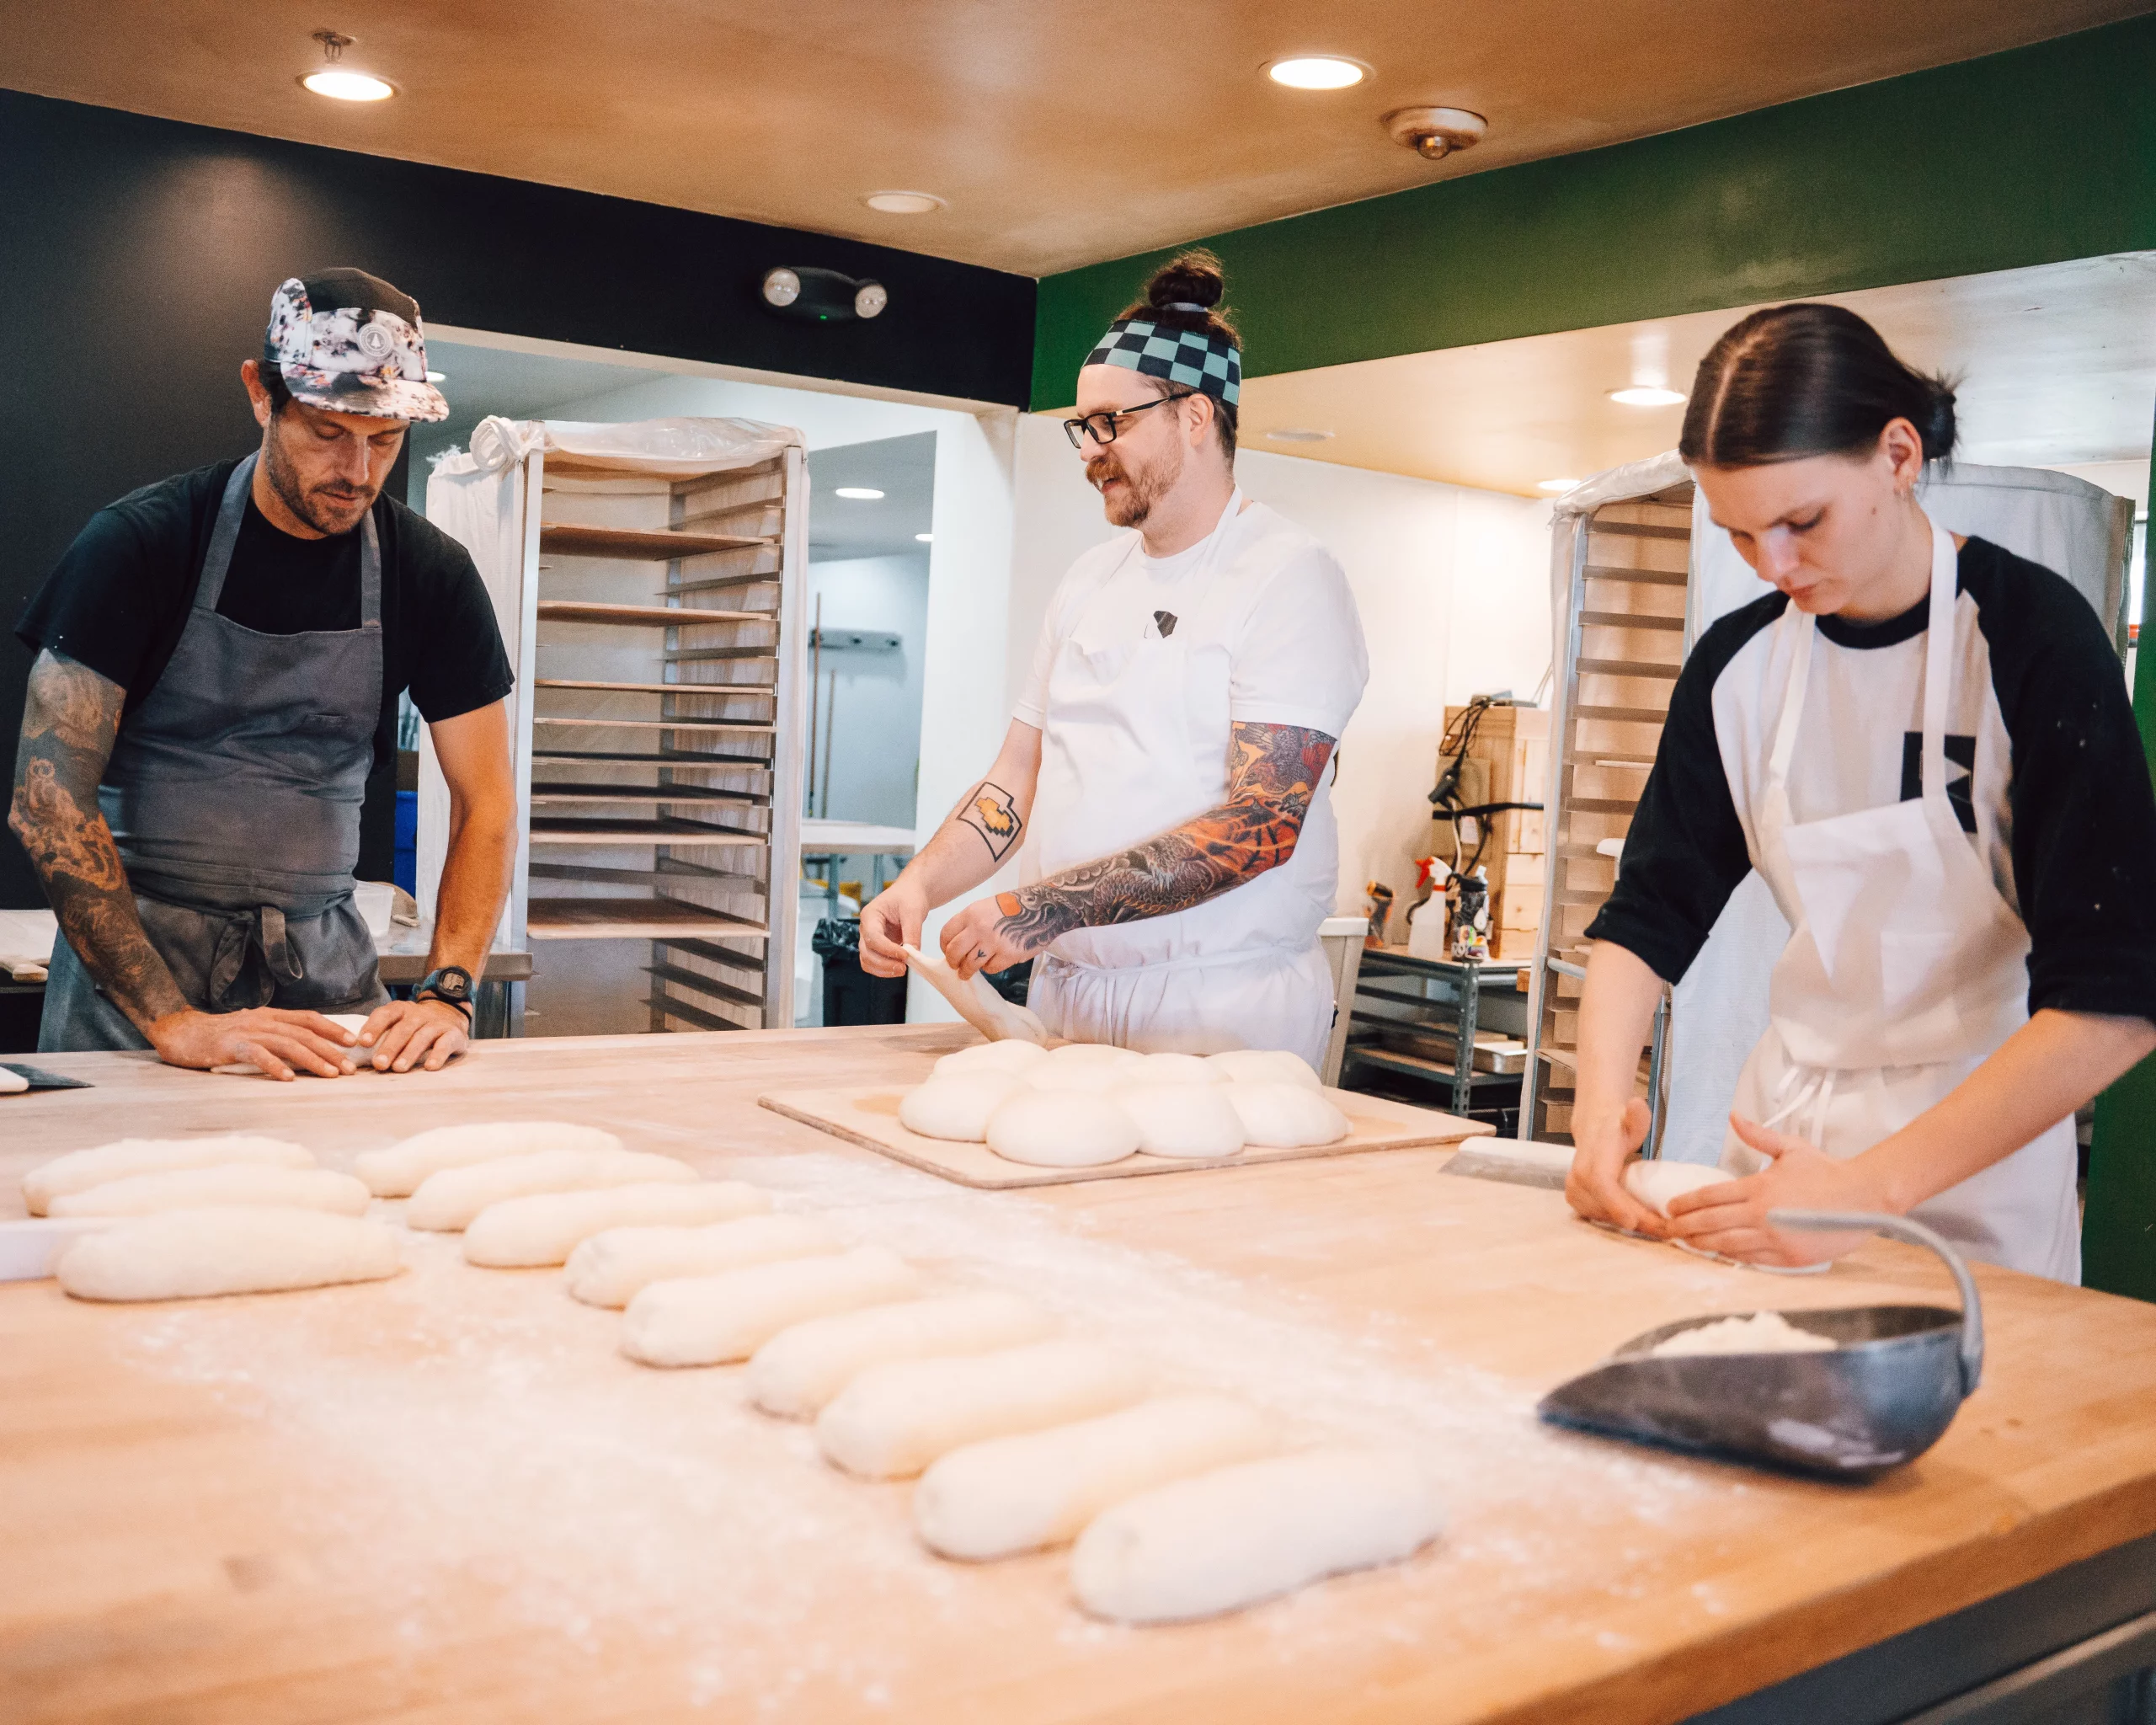 (L-R) Table X co-owner Nick Tramp, head of fermentation Neil Hopkins and bakery manager Elyse Smith knead dough together.